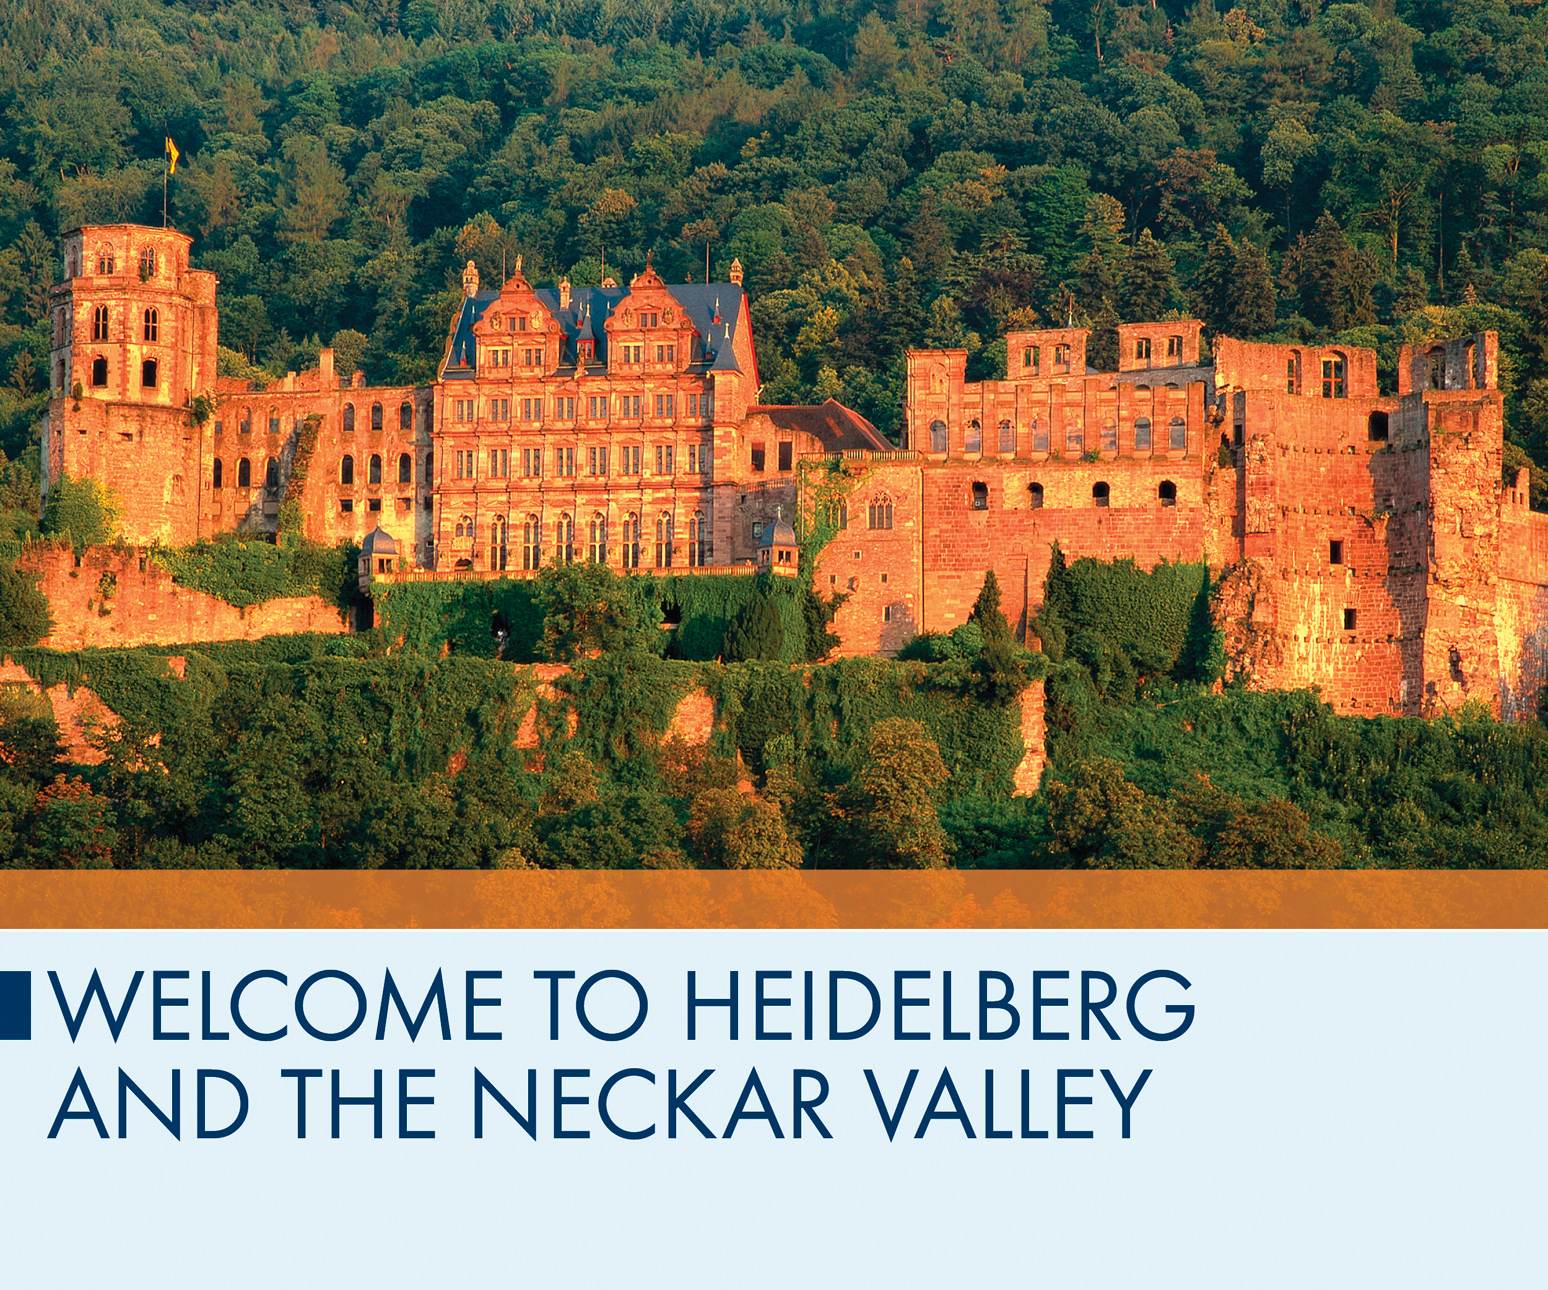 Welcome to Heidelberg and the Neckar Valley